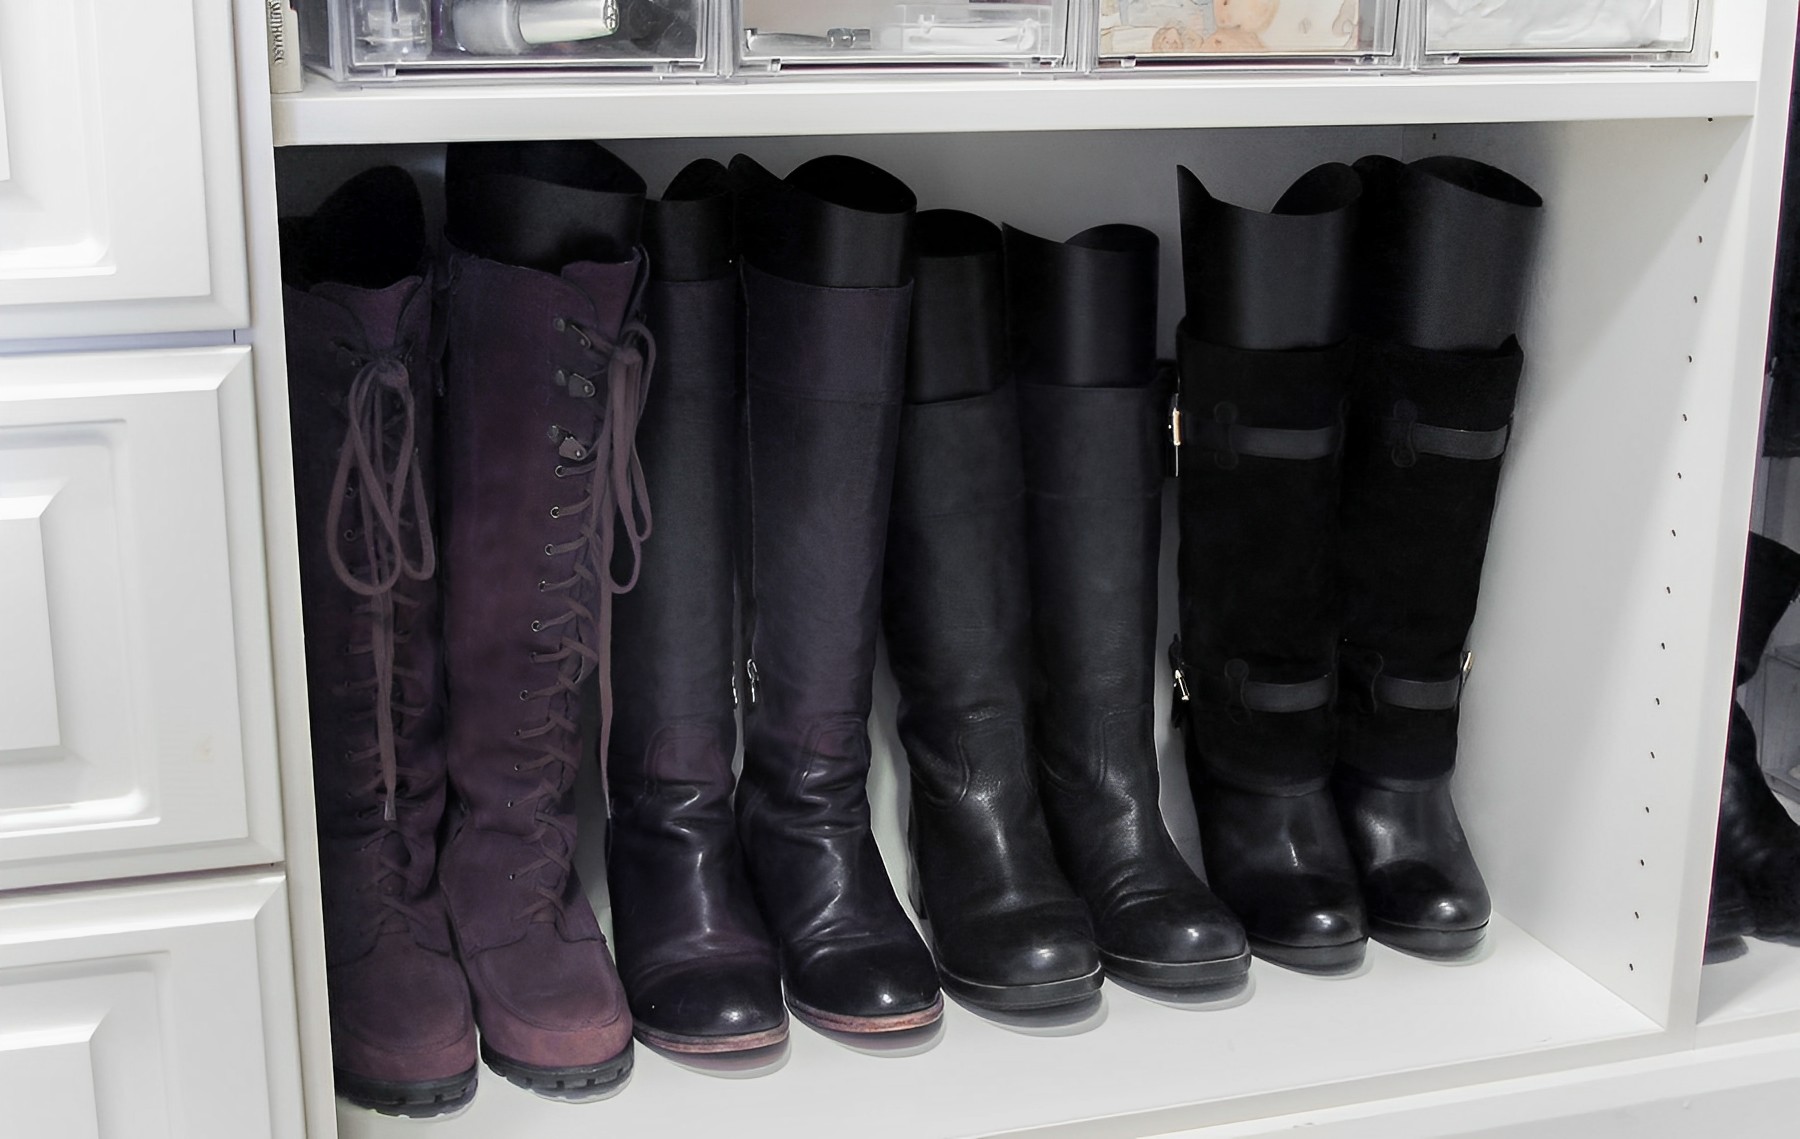 How To Store Boots In Small Closet